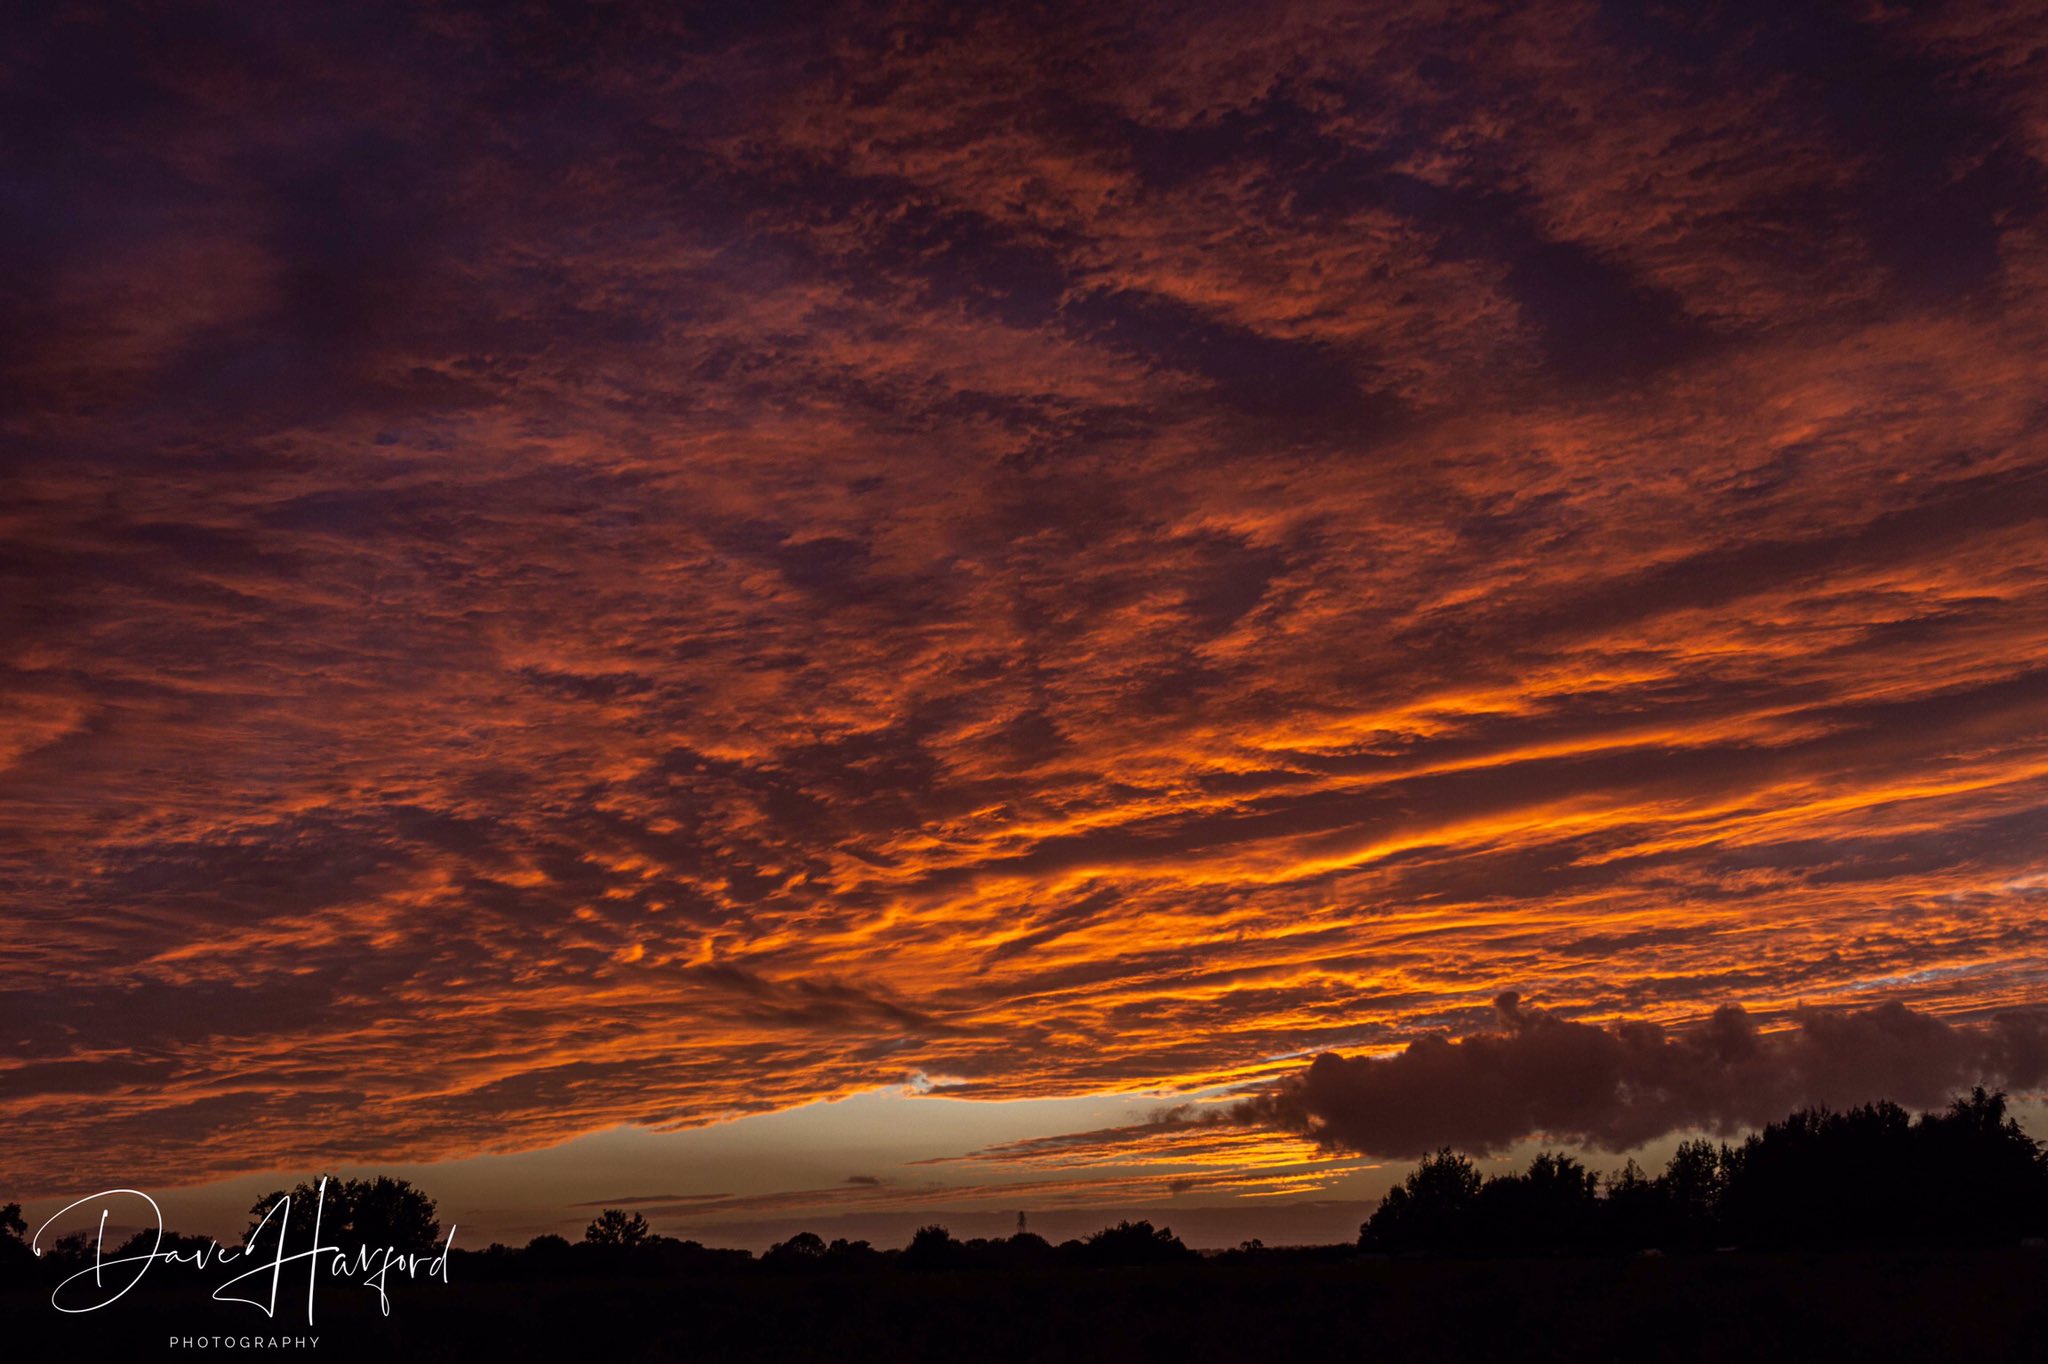 2nd Place Incredible sunset taken over Worcestershire in the UK by Dave Harford Photos @Dharford79S